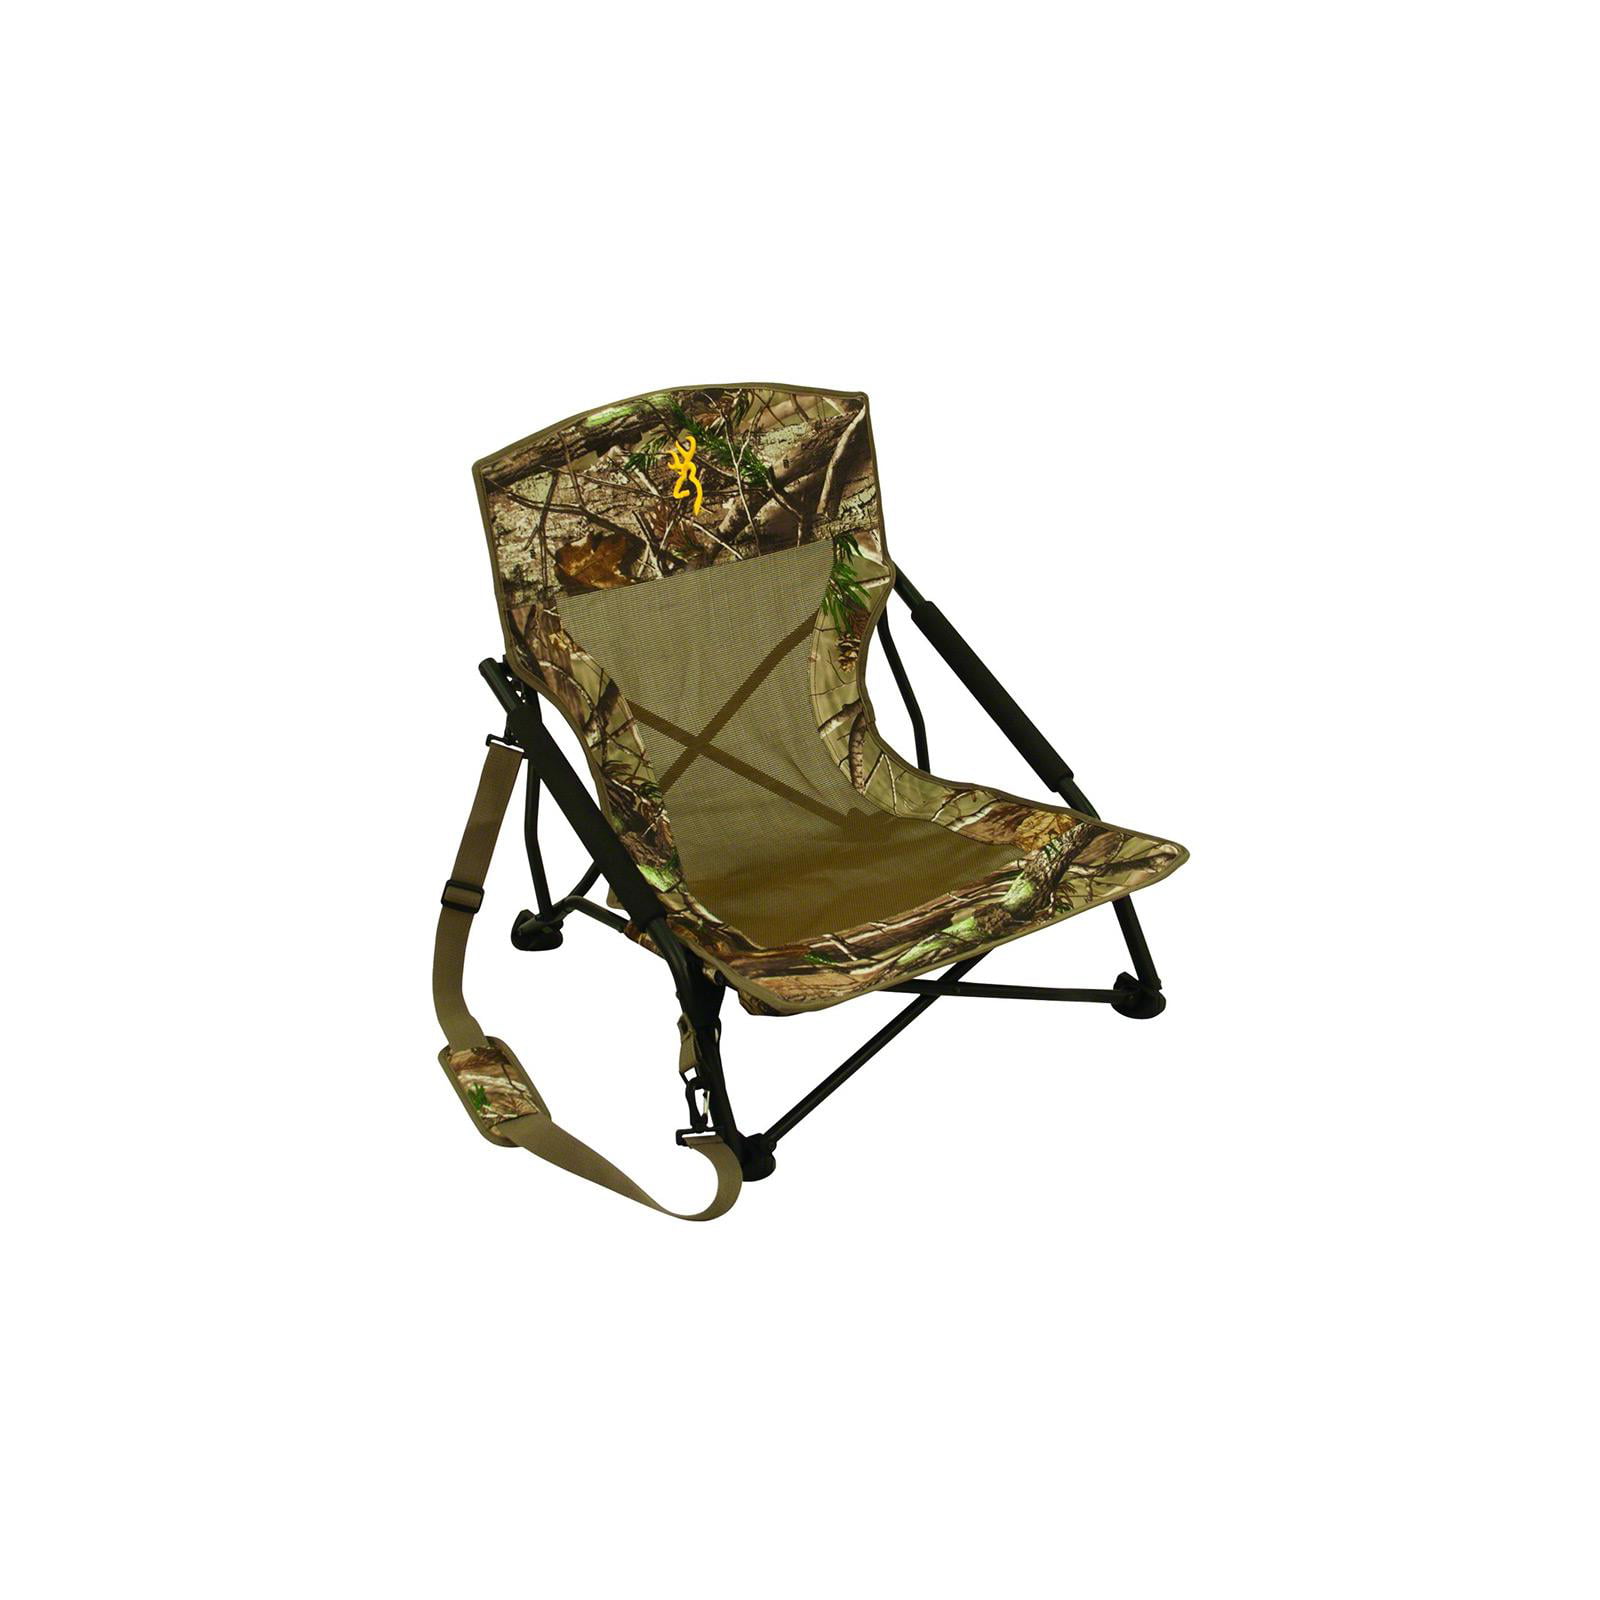 Browning Camping Strutter Stool 20 X 14 24 Camouflage Brown